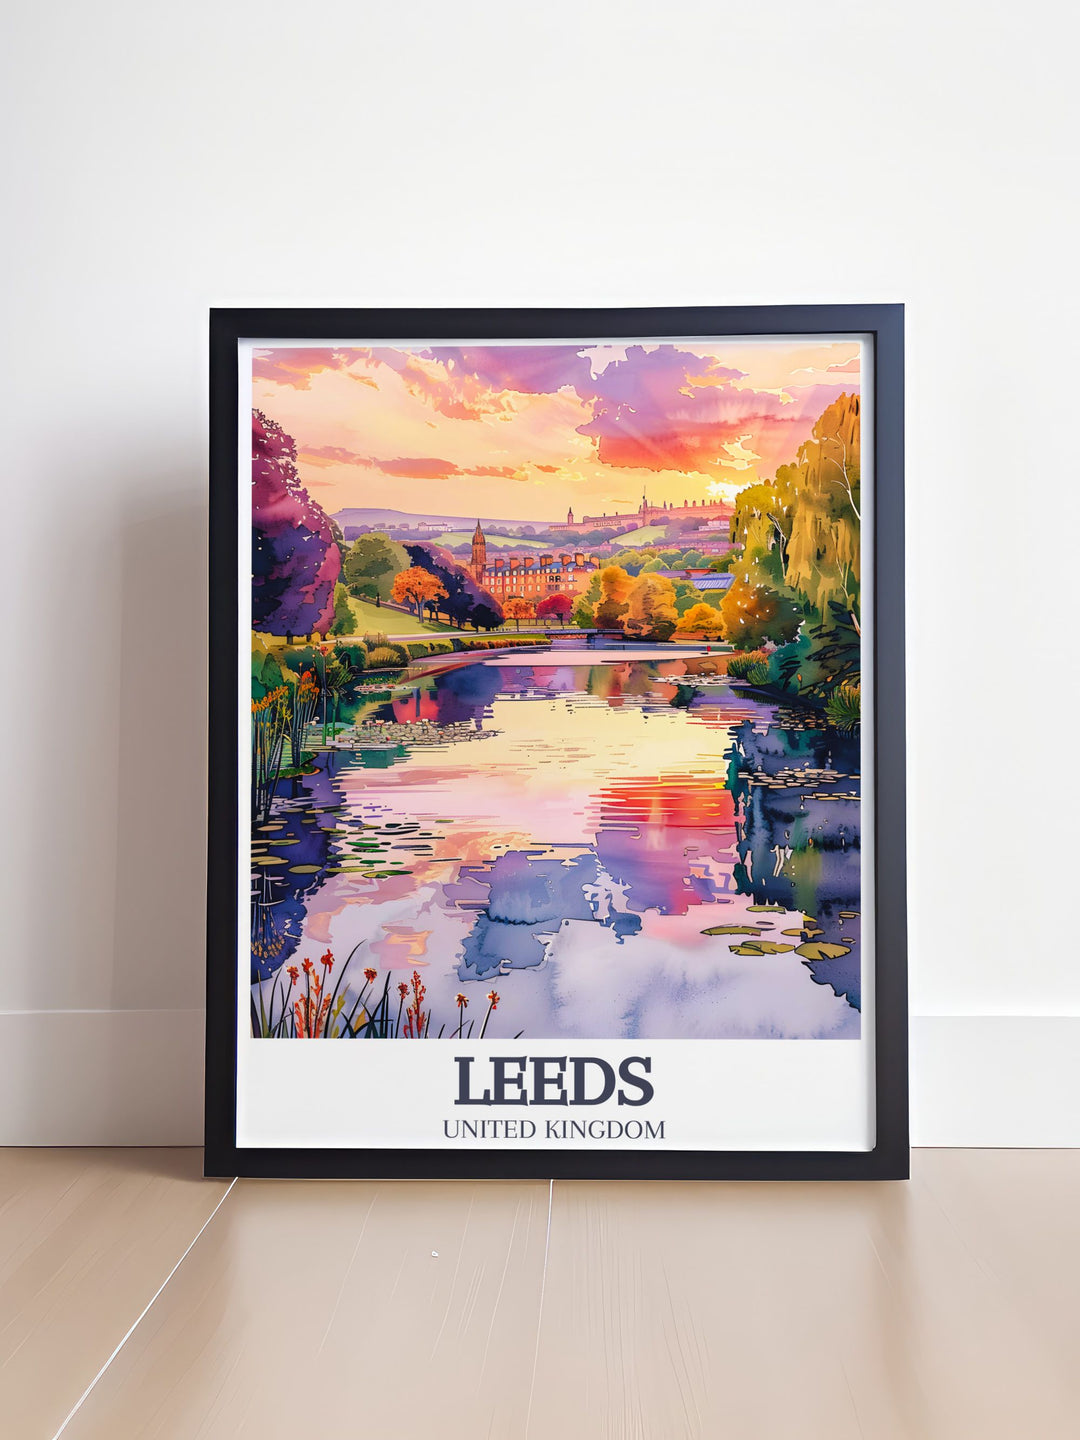 Elegant Roundhay Park and Waterloo Lake poster ideal for adding tranquility to your home decor. This England print captures the essence of Leeds natural beauty and makes a thoughtful gift for loved ones.